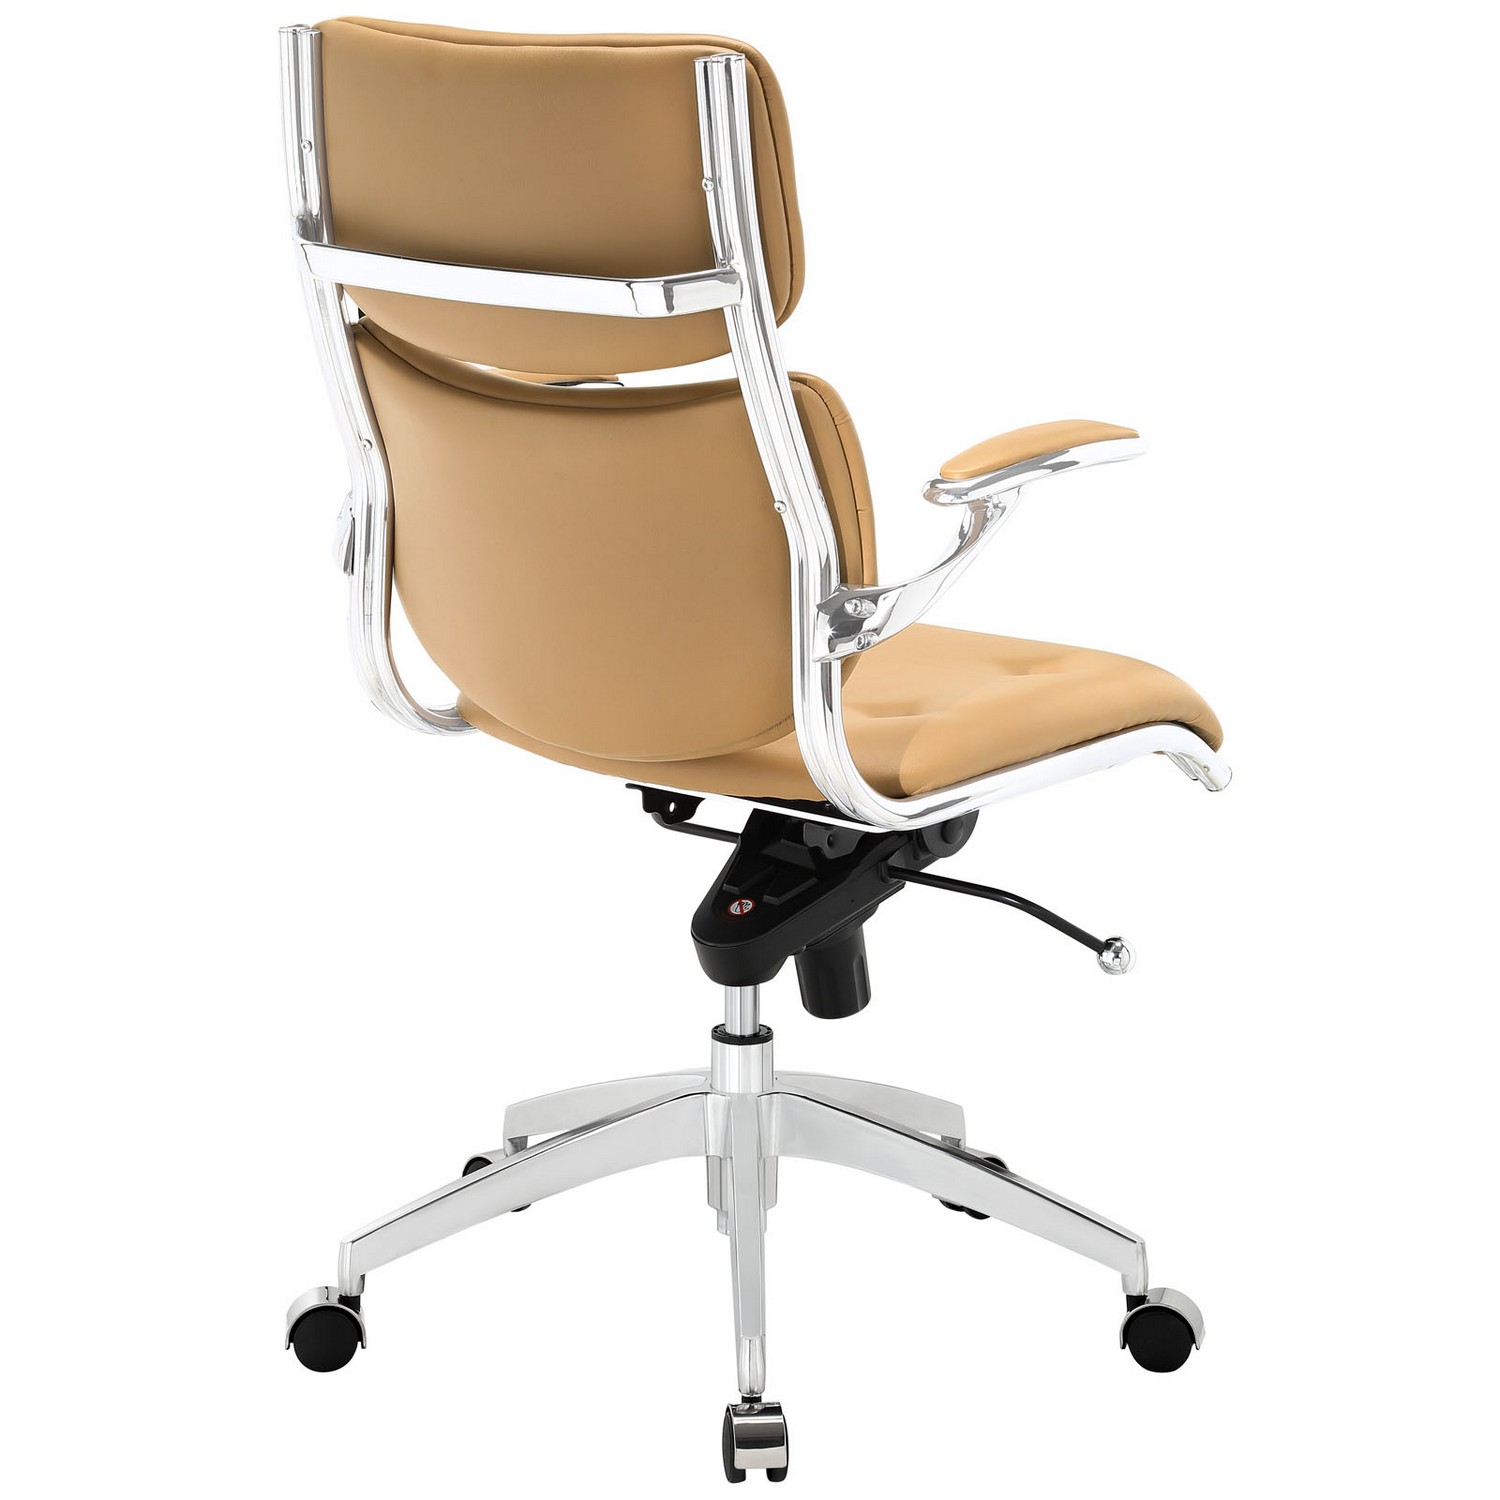 Modway Push Mid Back Office Chair - Tan